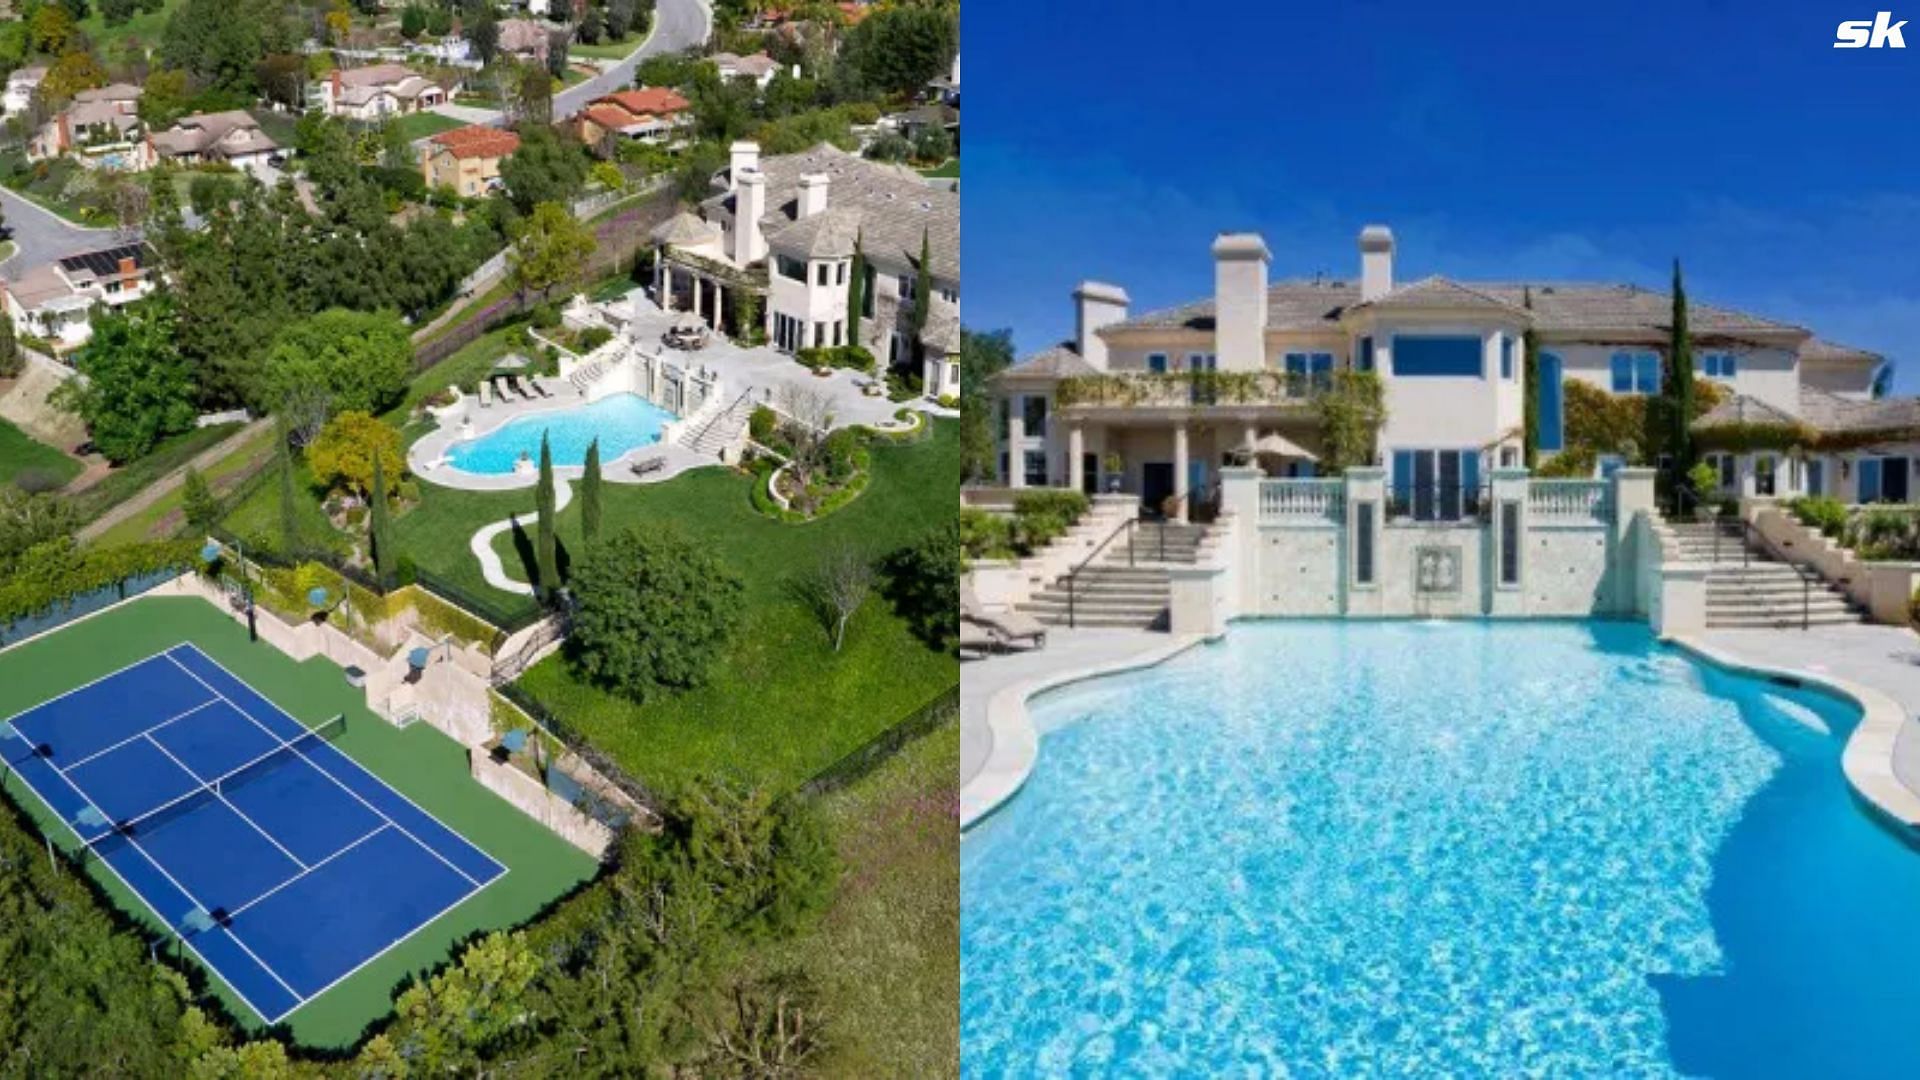 Exterior of the Laguna Hills mansion: a championship tennis court (L) and a swimming pool (R)